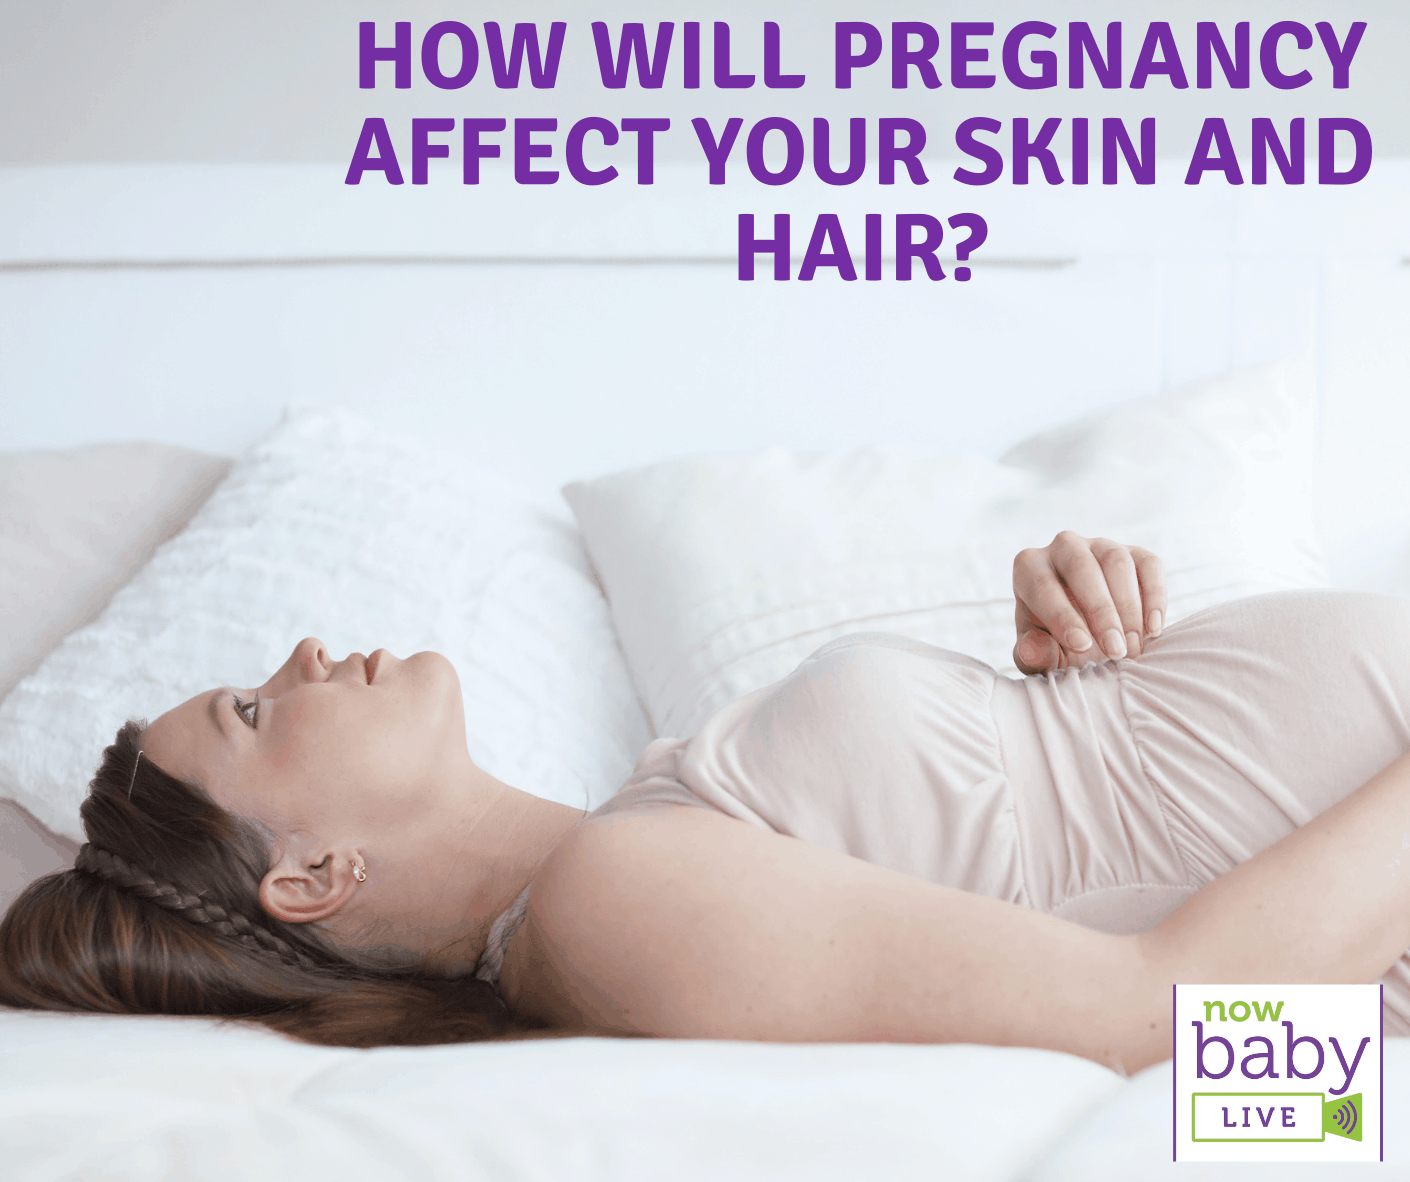 How will pregnancy affect your skin and hair?